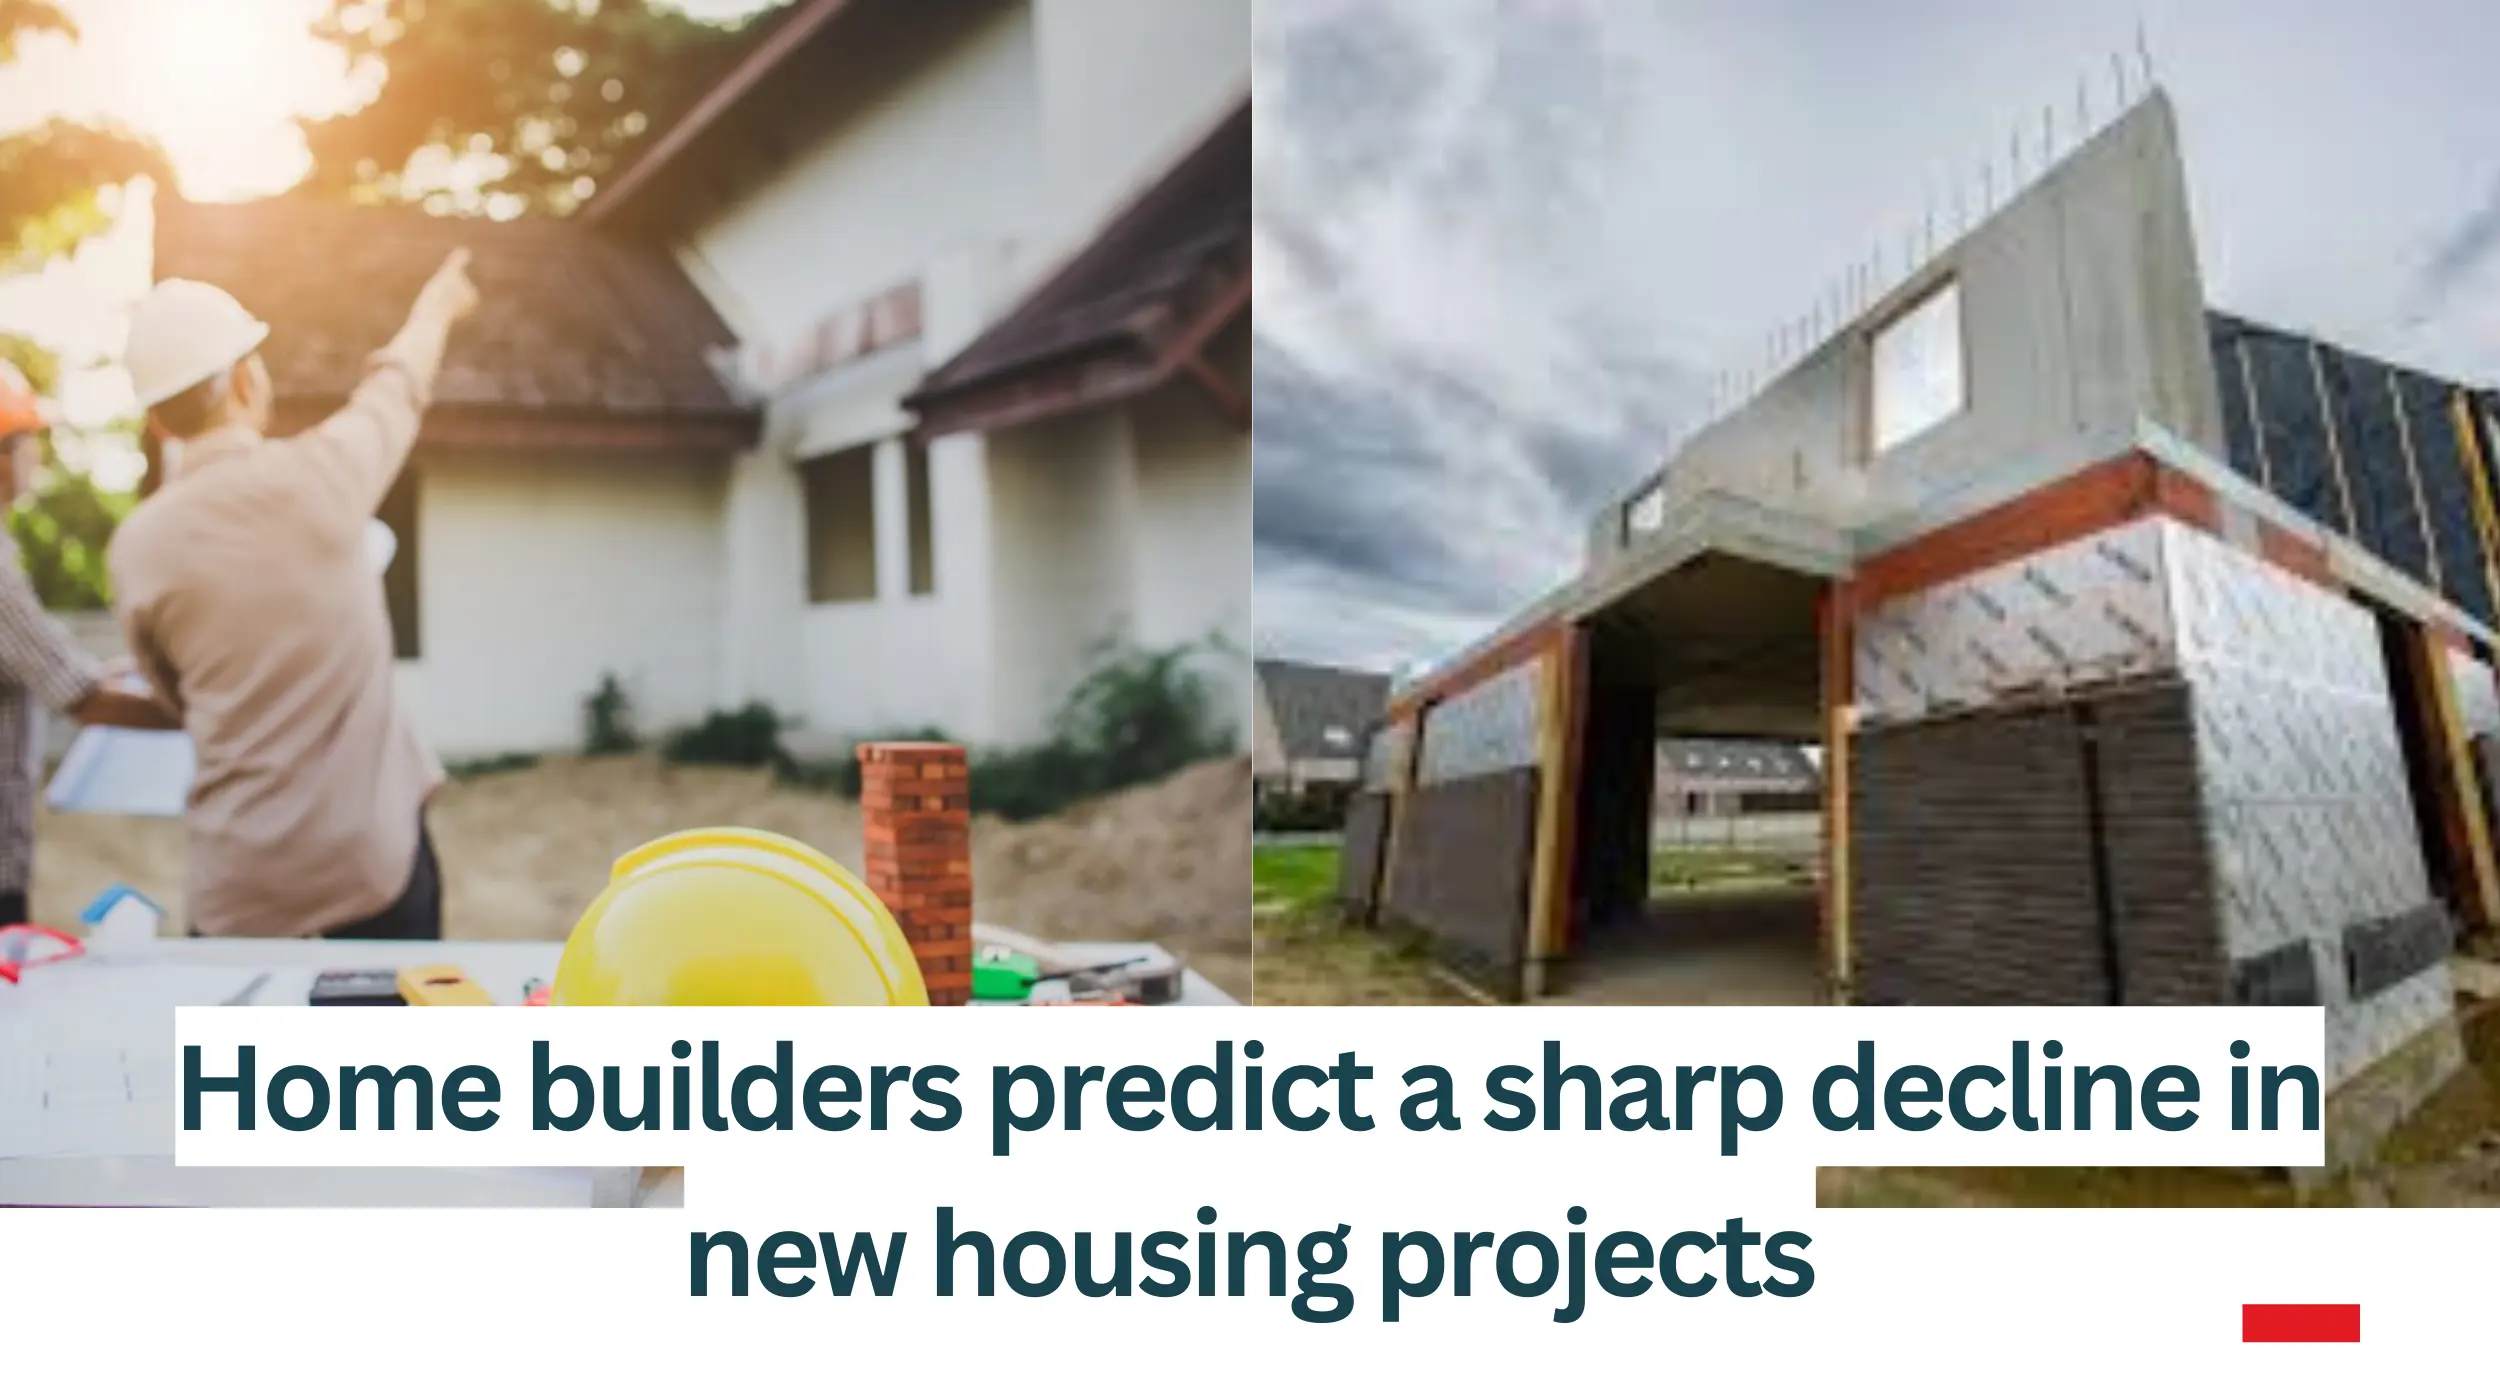 Home-builders-predict-a-sharp-decline-in-new-housing-projects.